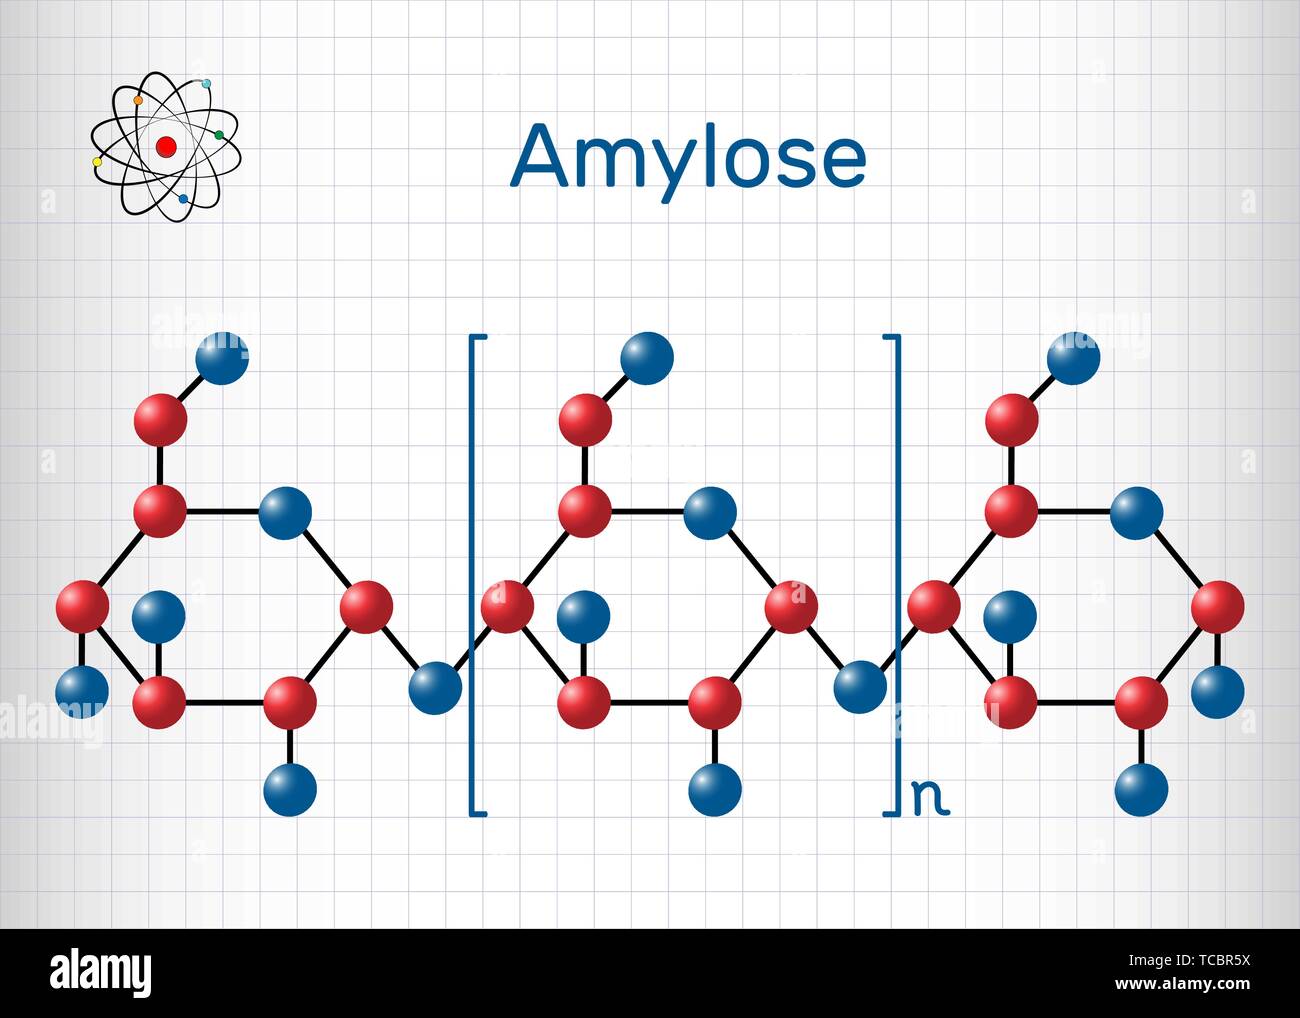 Amylose molecule. It is a polysaccharide and one of the two components of starch. Structural chemical formula and molecule model. Sheet of paper in a  Stock Vector